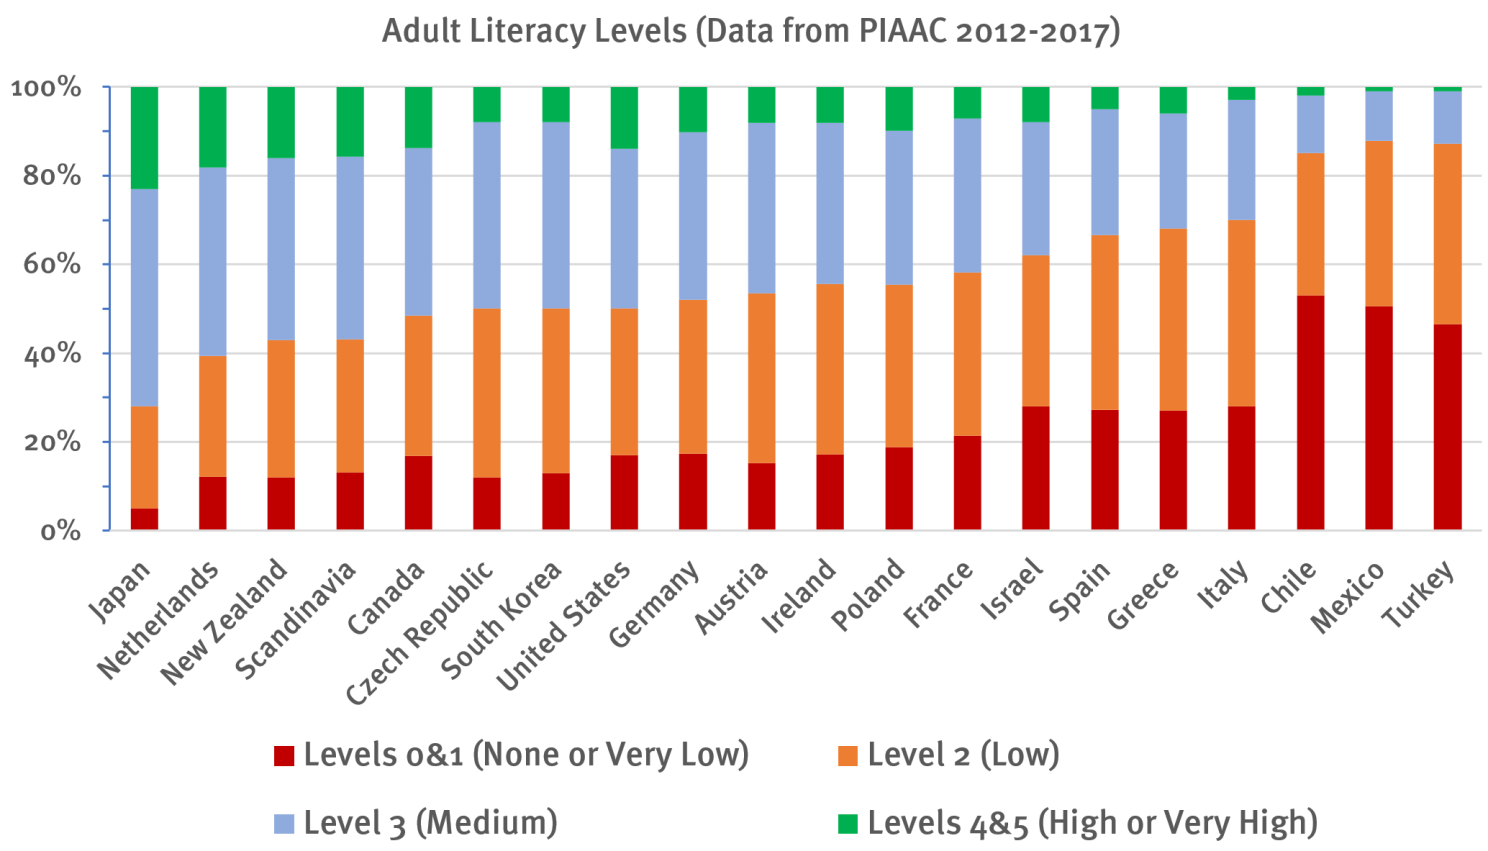 OECD data compiling reading literacy levels across countries